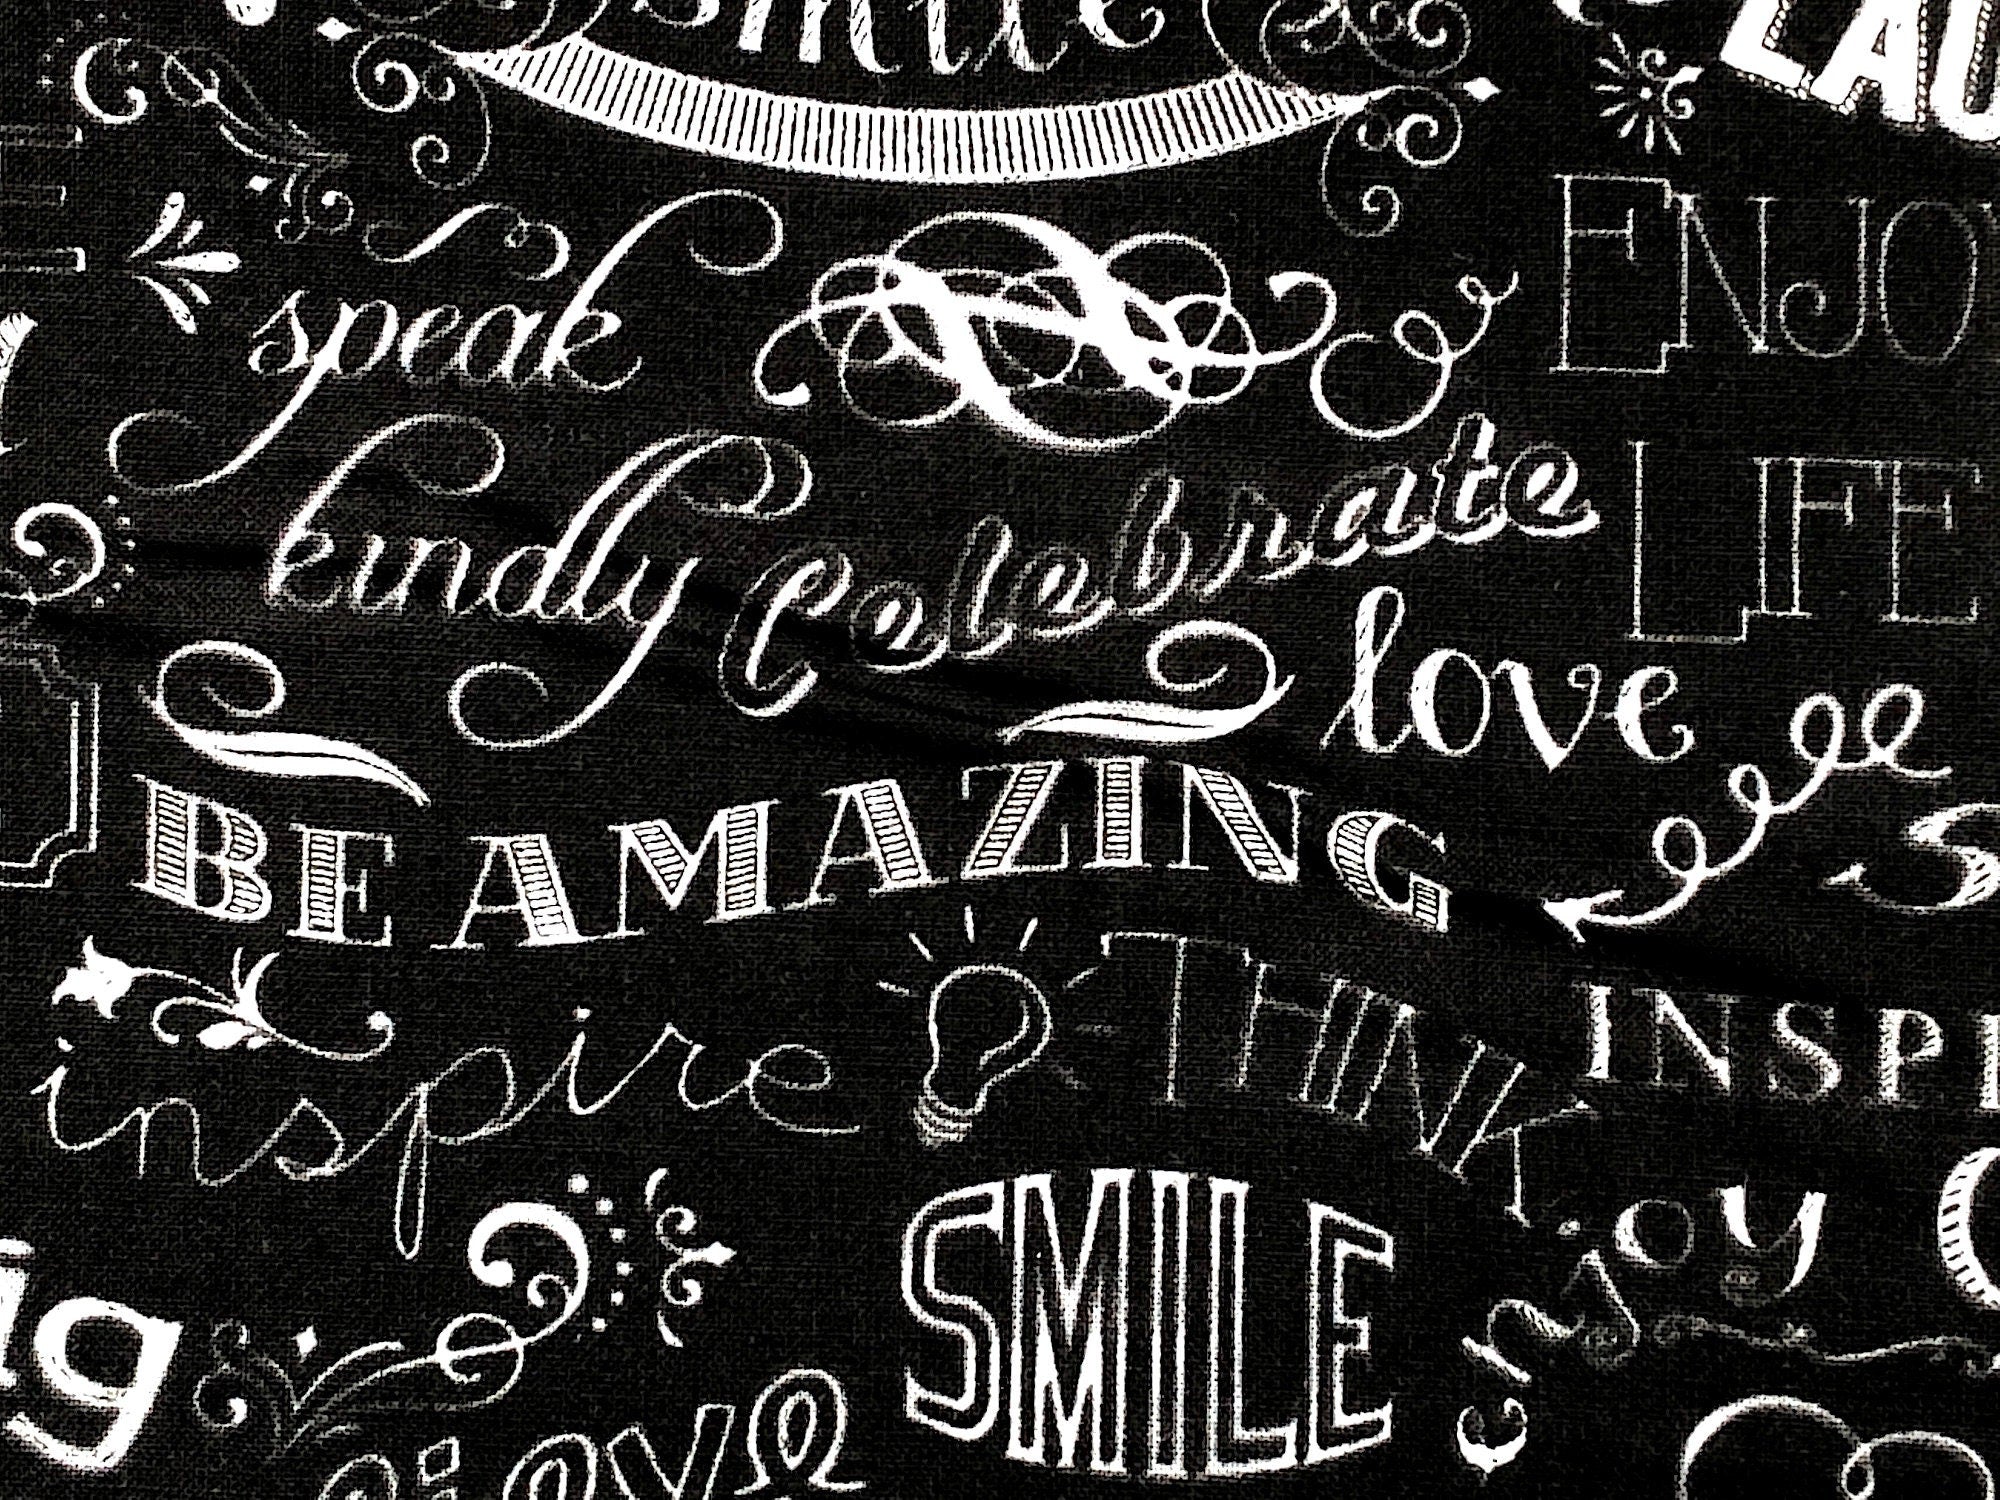 Close up of sayings such as inspire, smile, think, speak kindly and more.